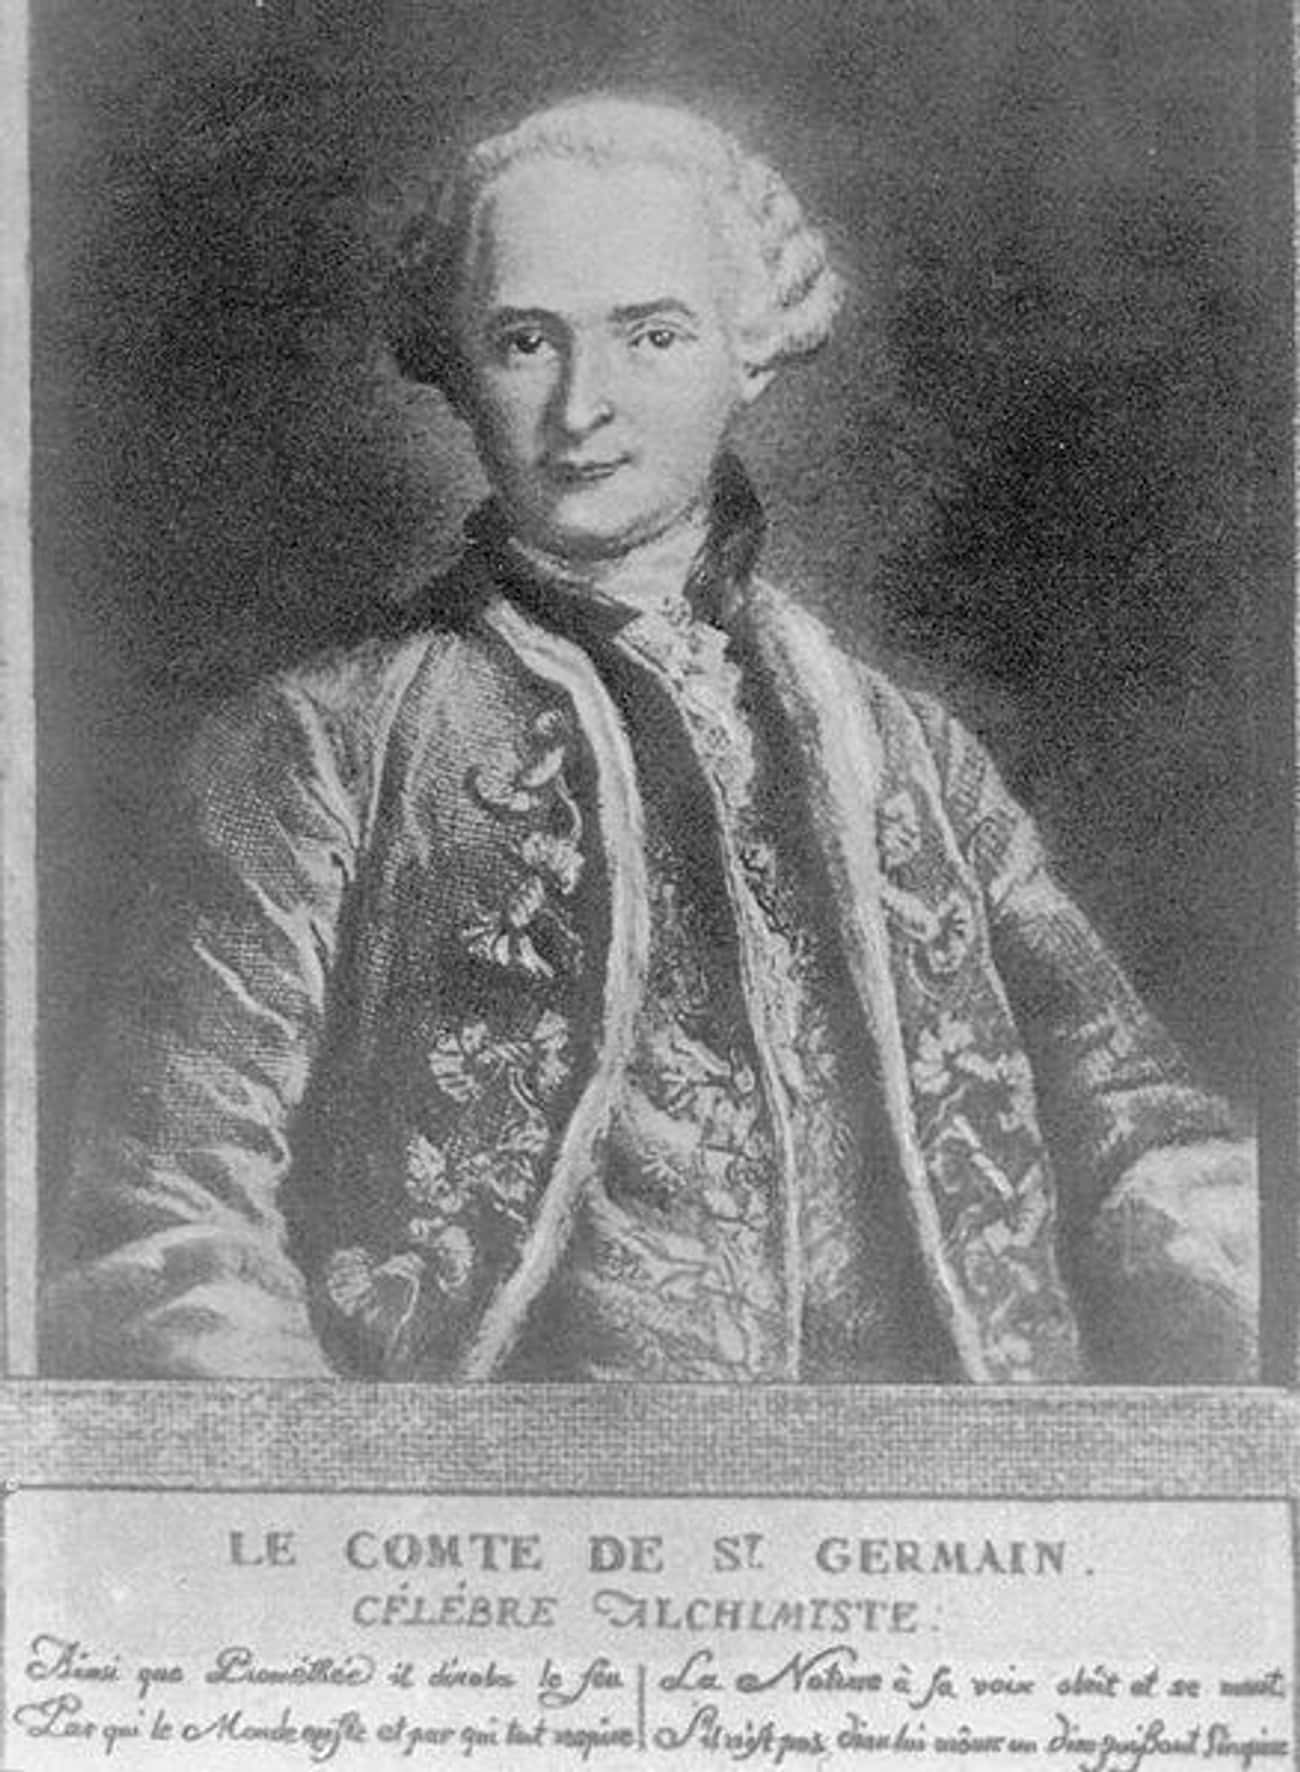 Saint Germain Said He Descended From The Comte De Saint Germain, But They May Have Been The Same Person